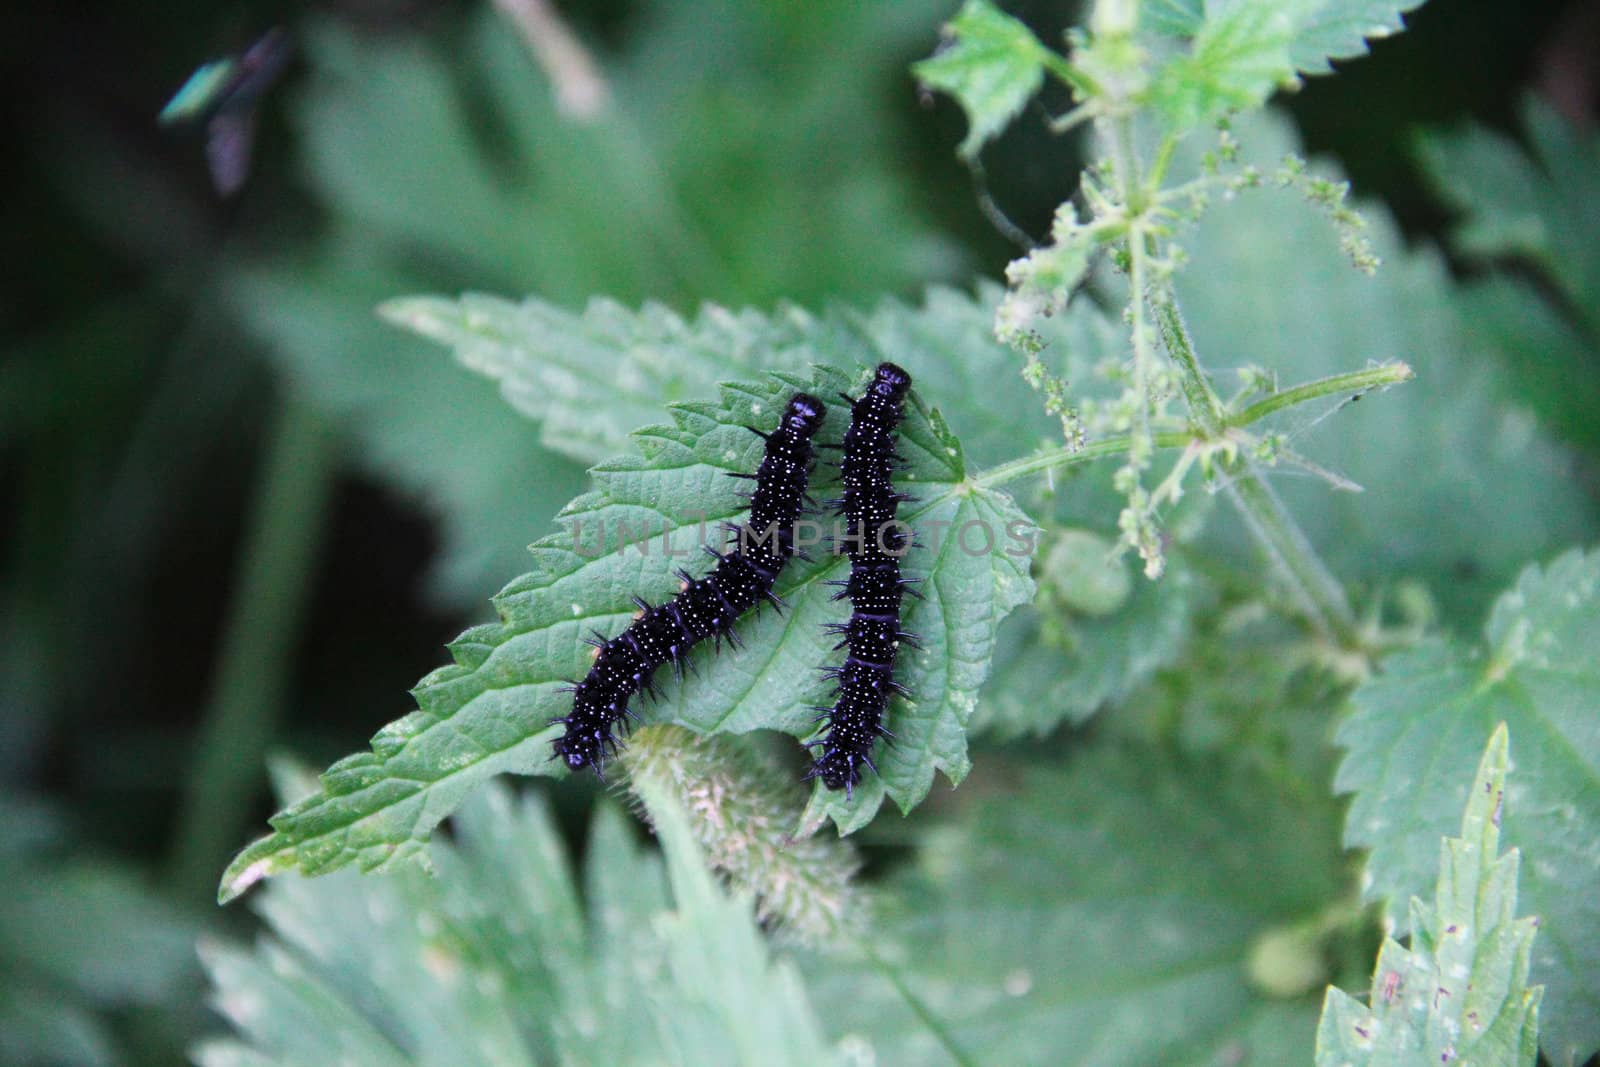 Two black caterpillars on leaf of a plant